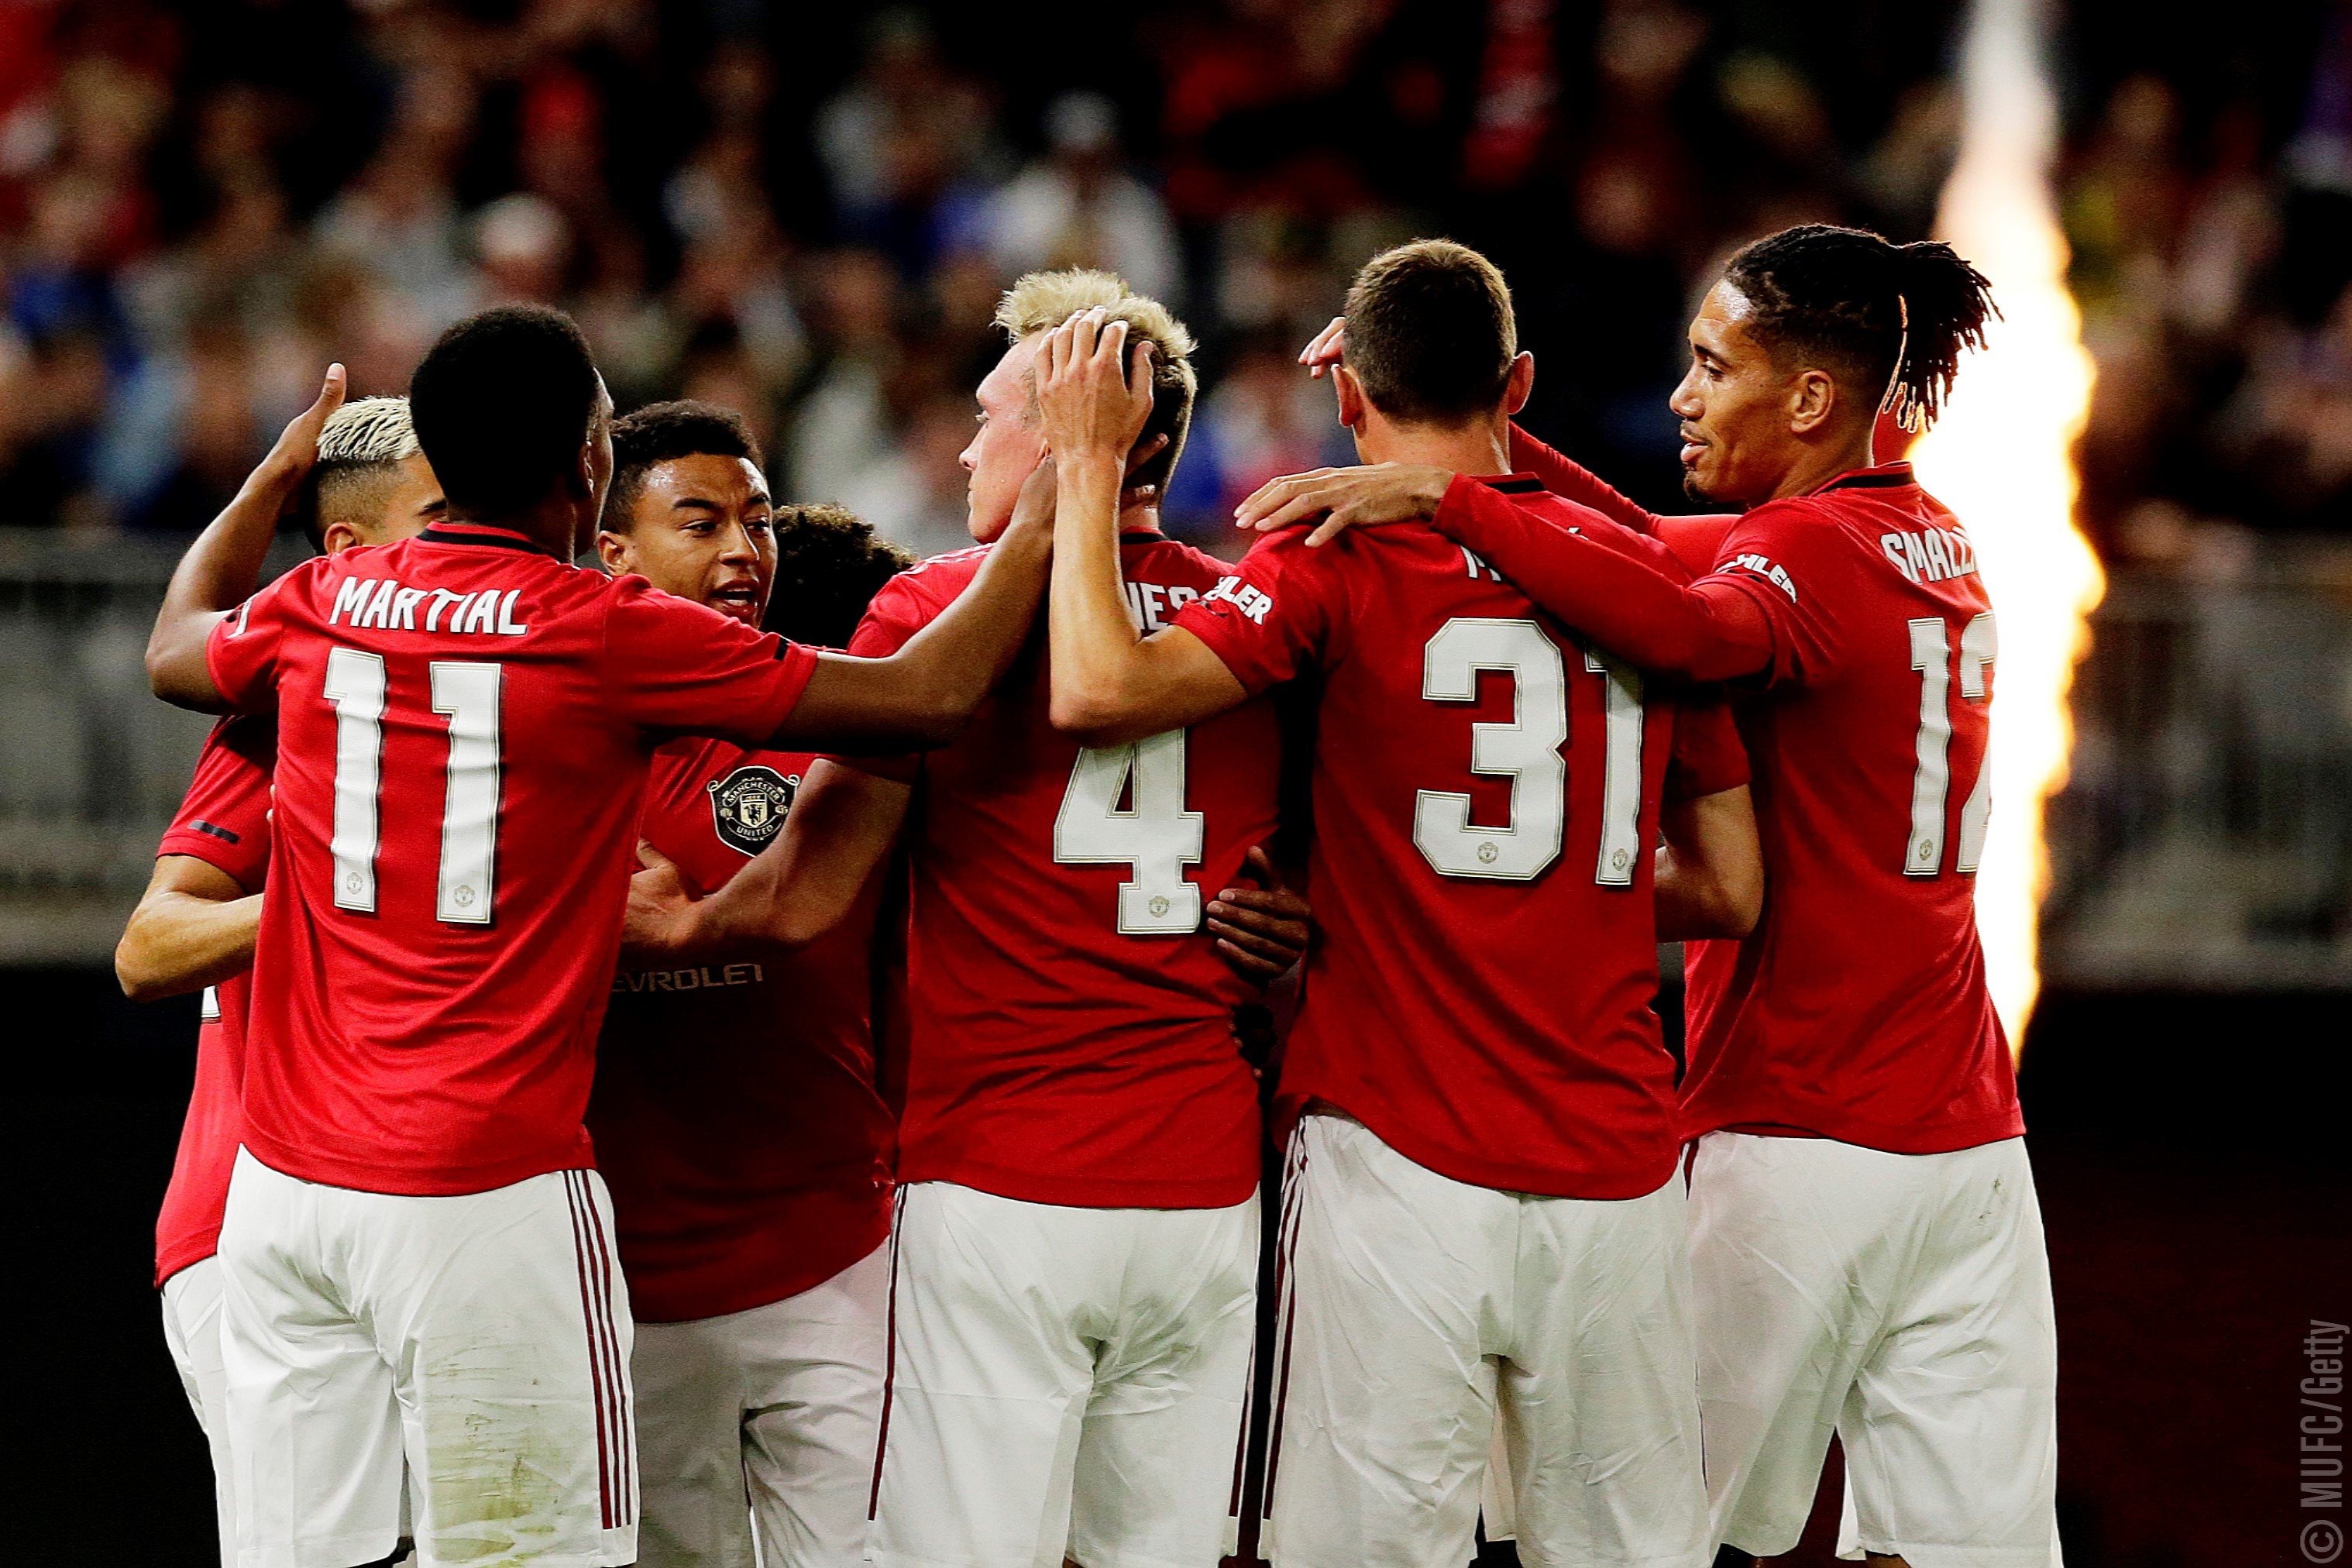 Pemain Manchester United